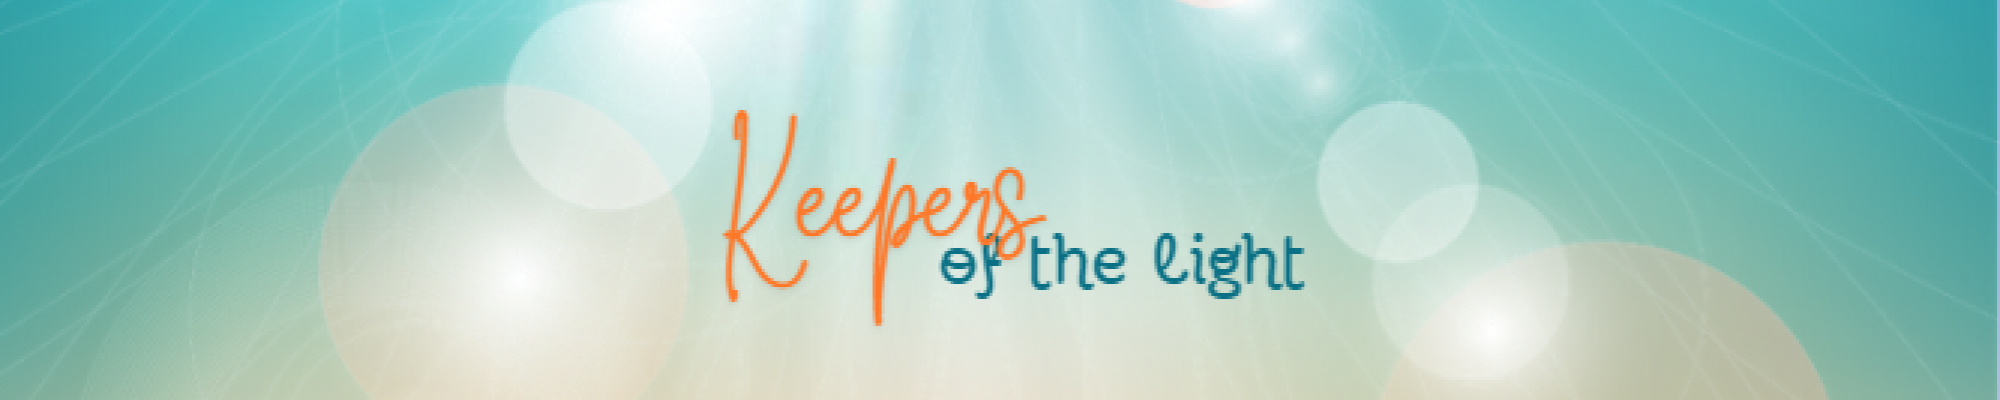 Keepers of the Light donation page